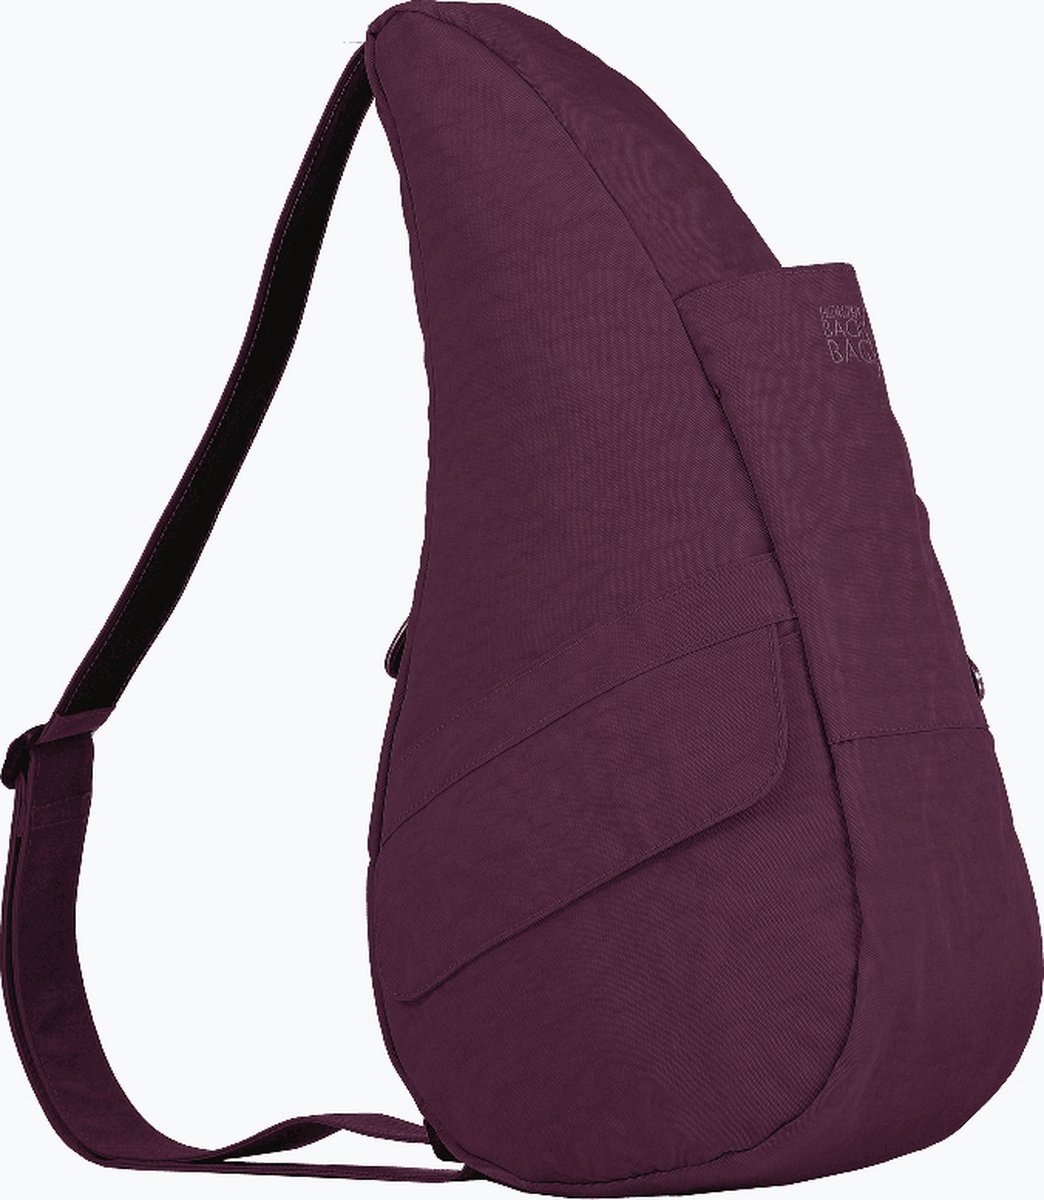 The Healthy Back Bag S The Classic Collection Textured Nylon Sangria